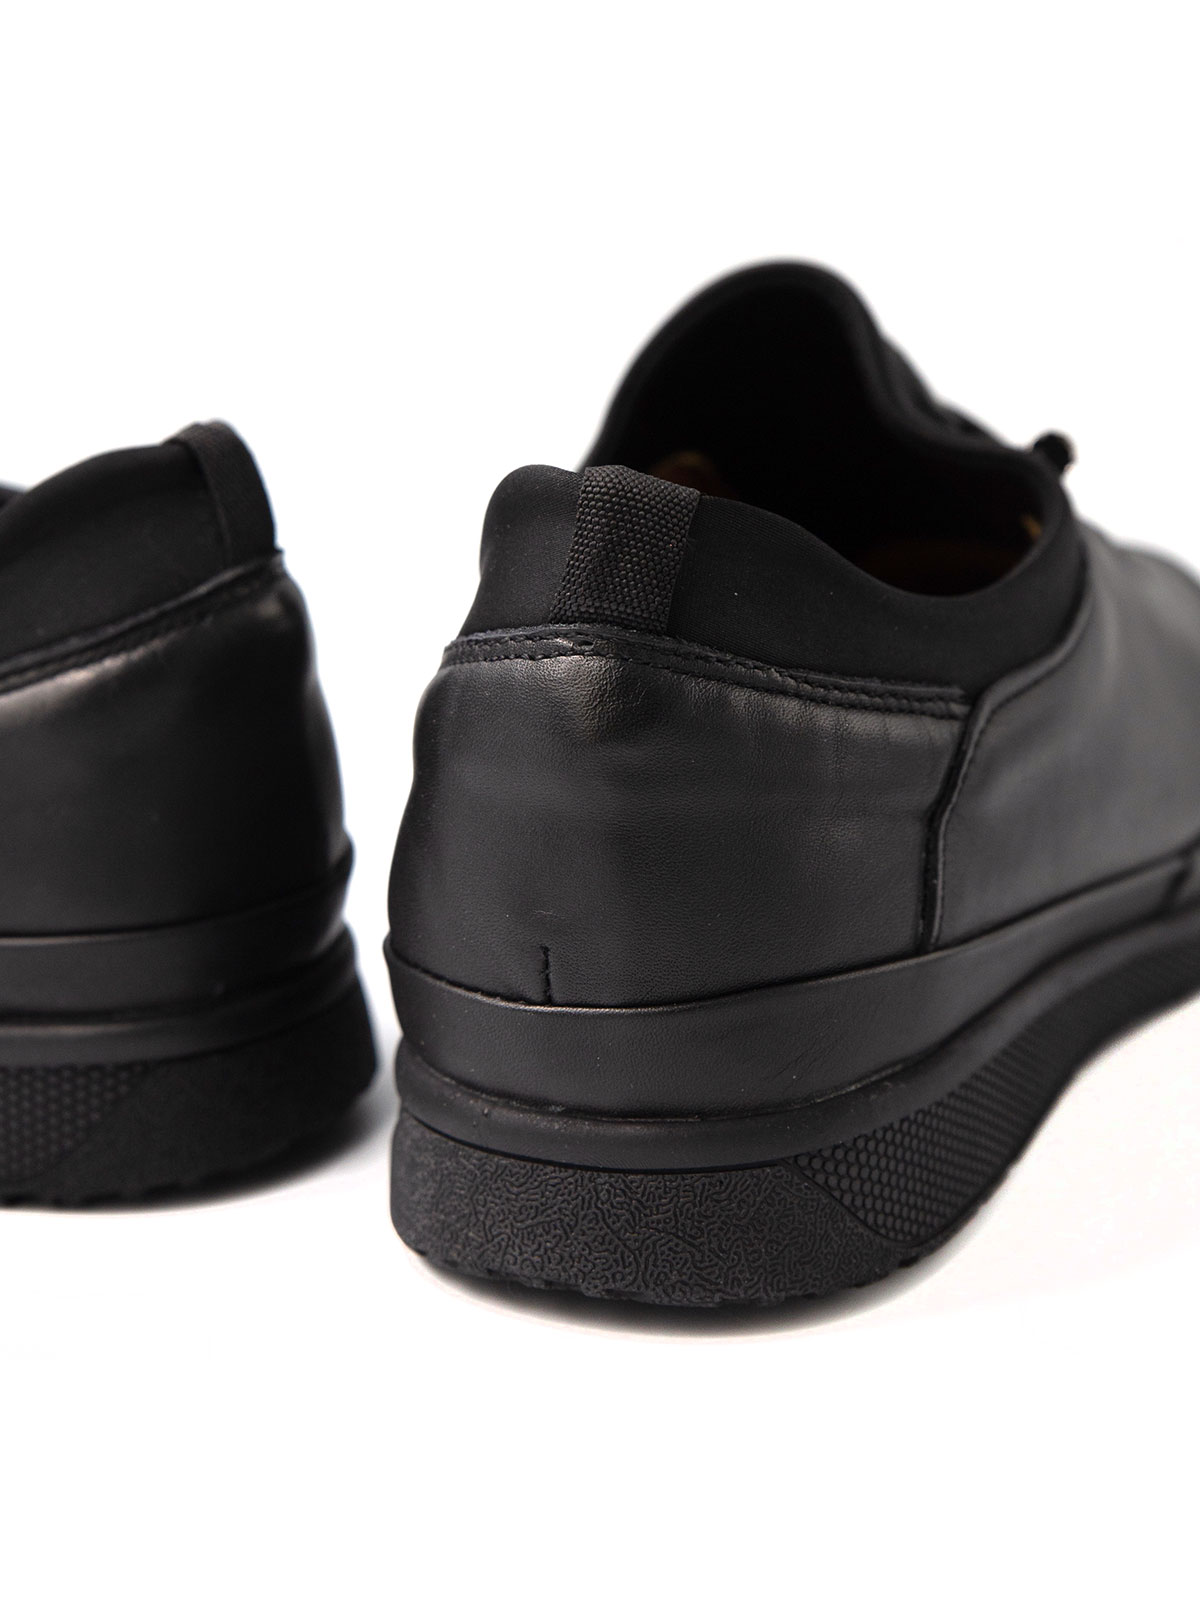 Black leather shoes with elastic laces - 81095 - € 41.62 img4